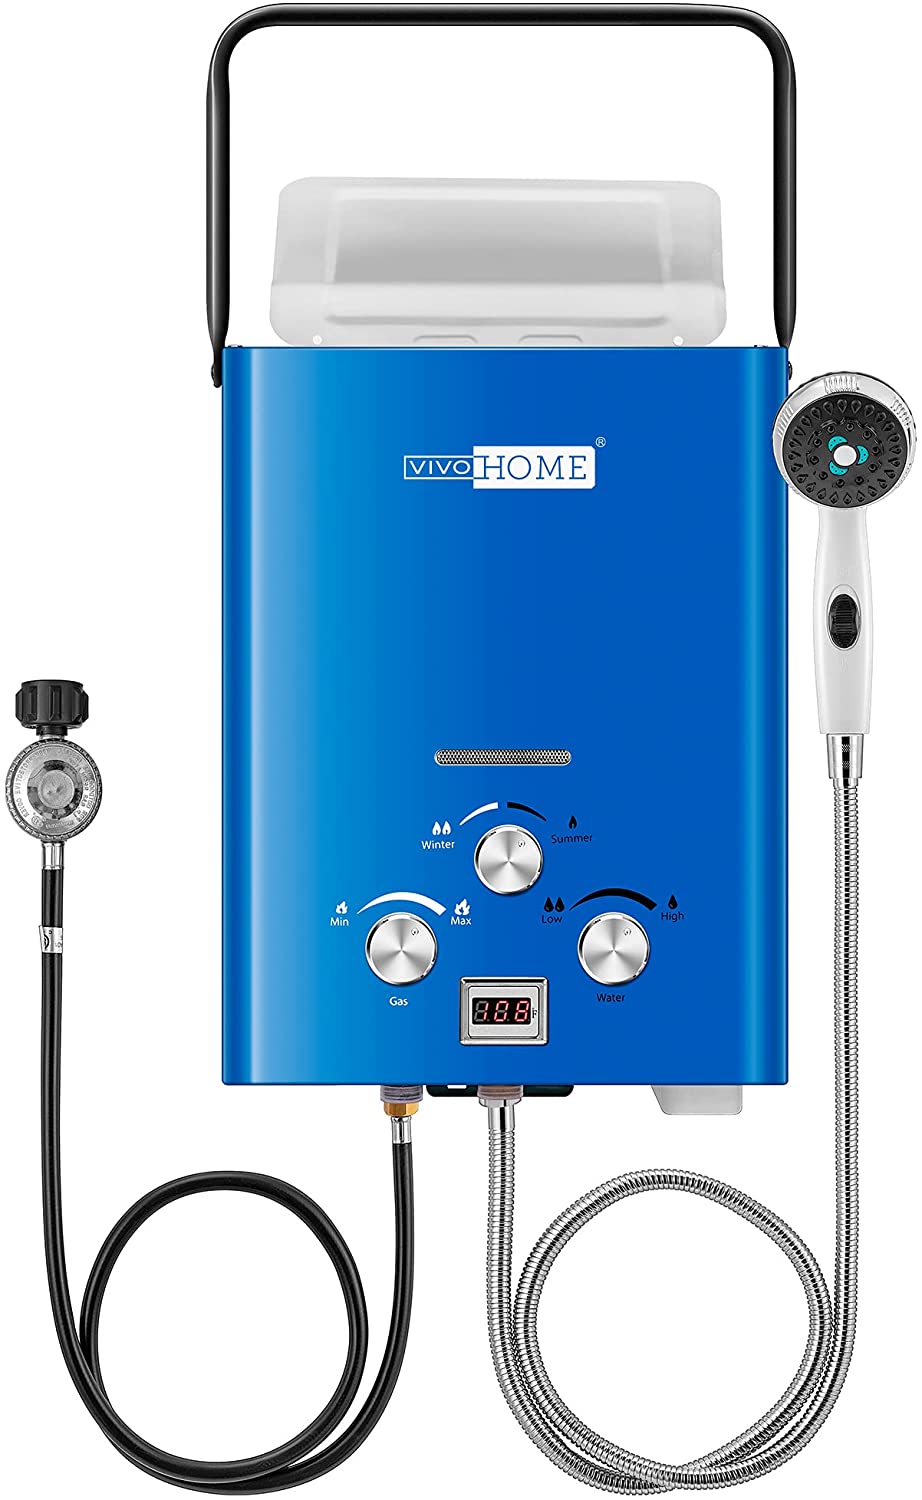 VIVOHOME 1.6GMP 6L Propane Gas Tankless Water Heater